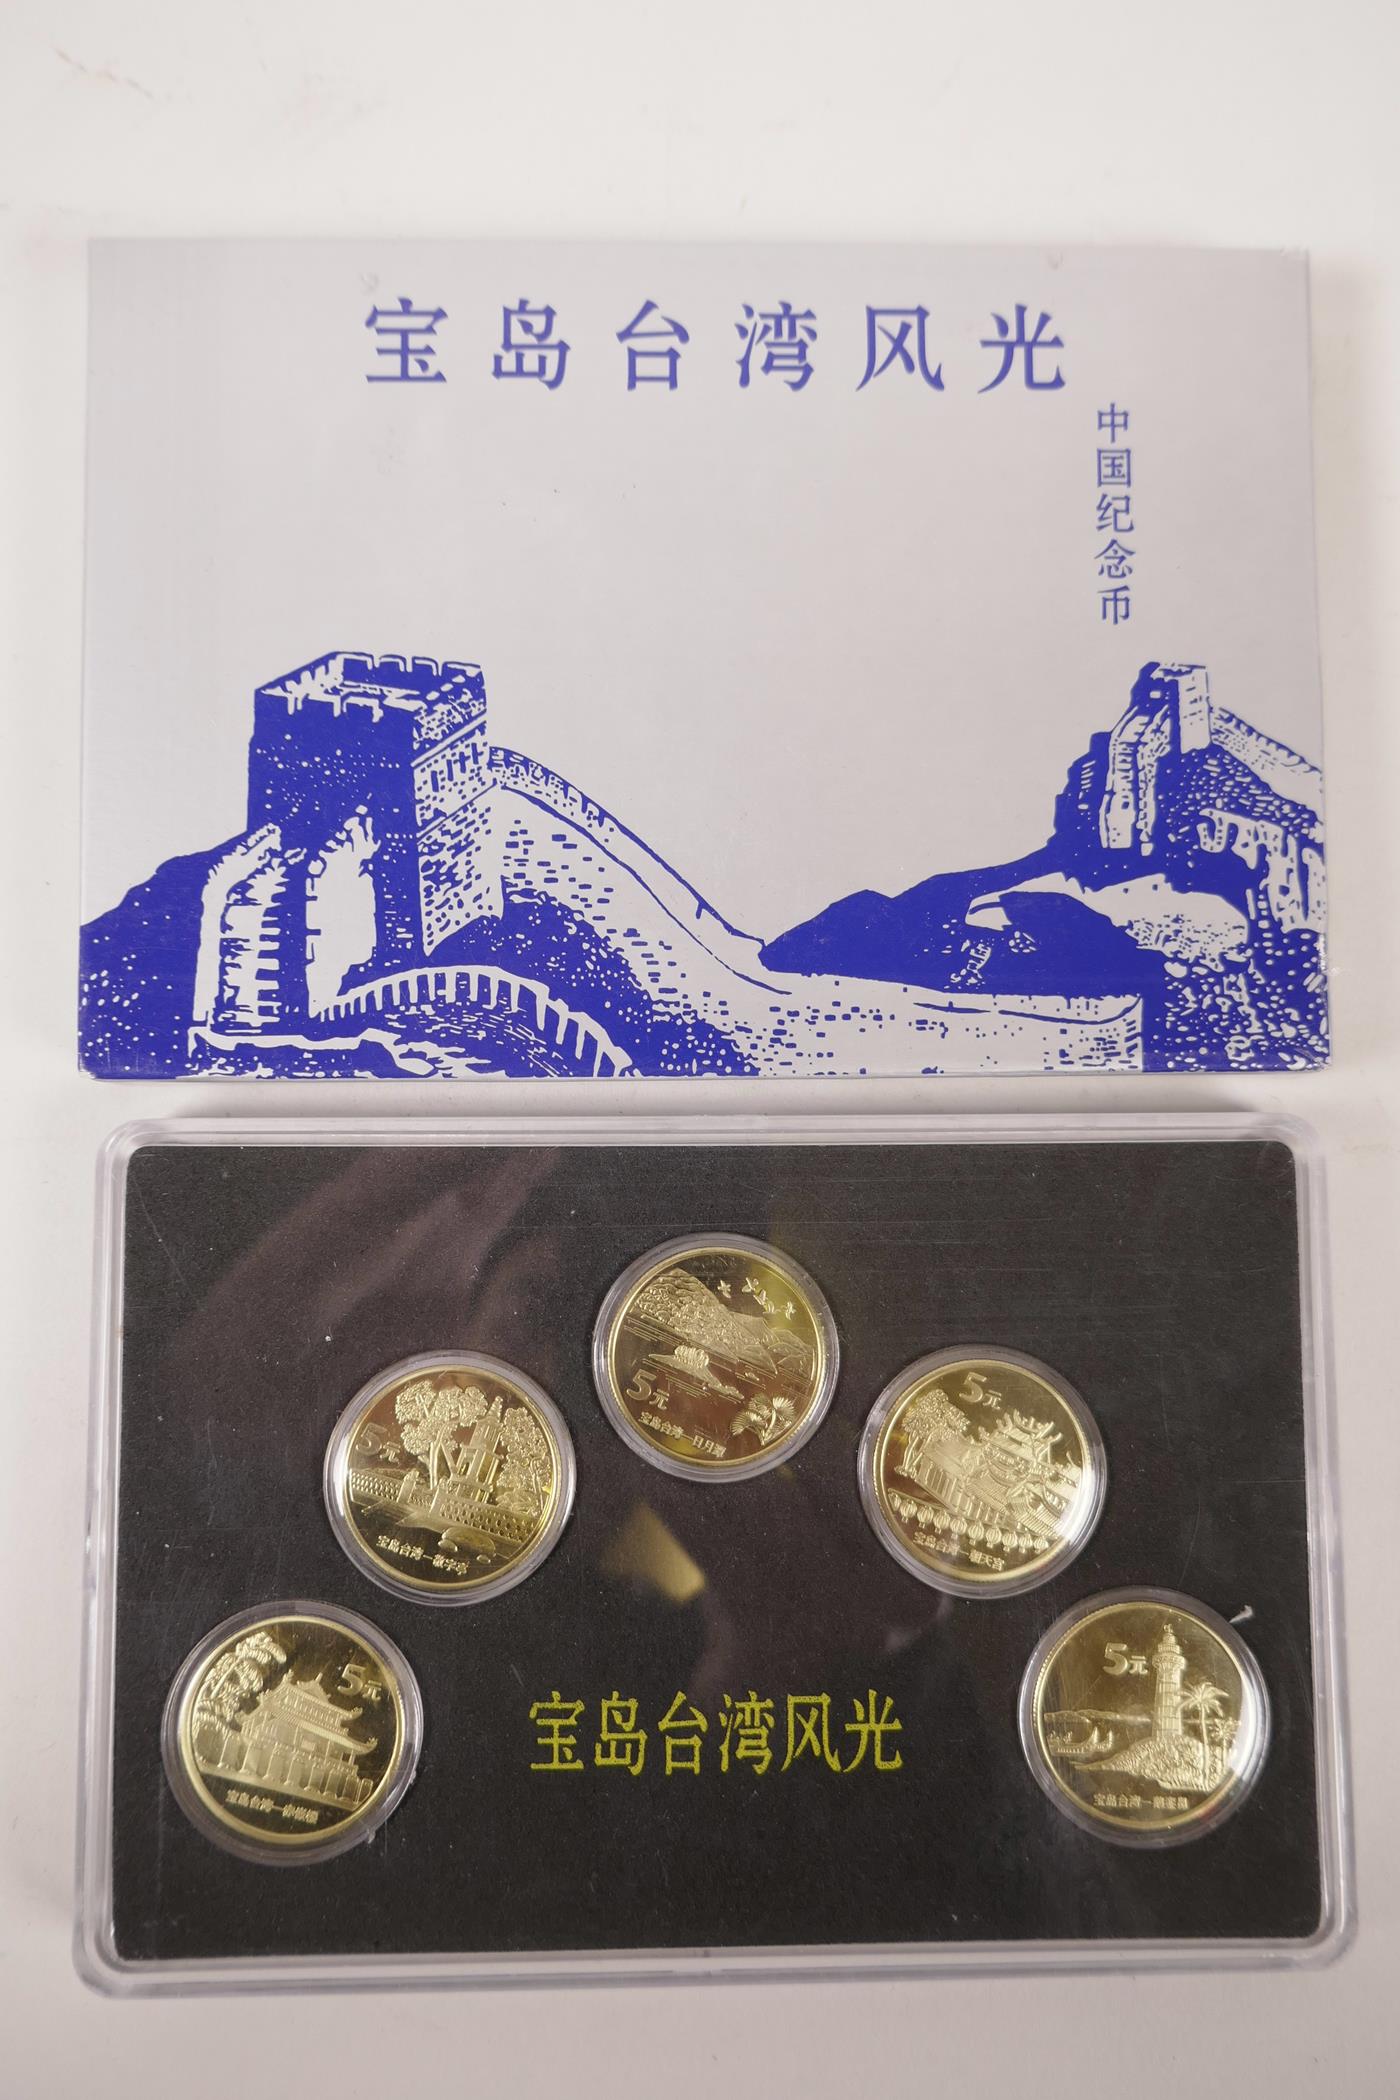 A cased collection of facsimile (replica) Chinese gilt metal coins commemorating important monuments